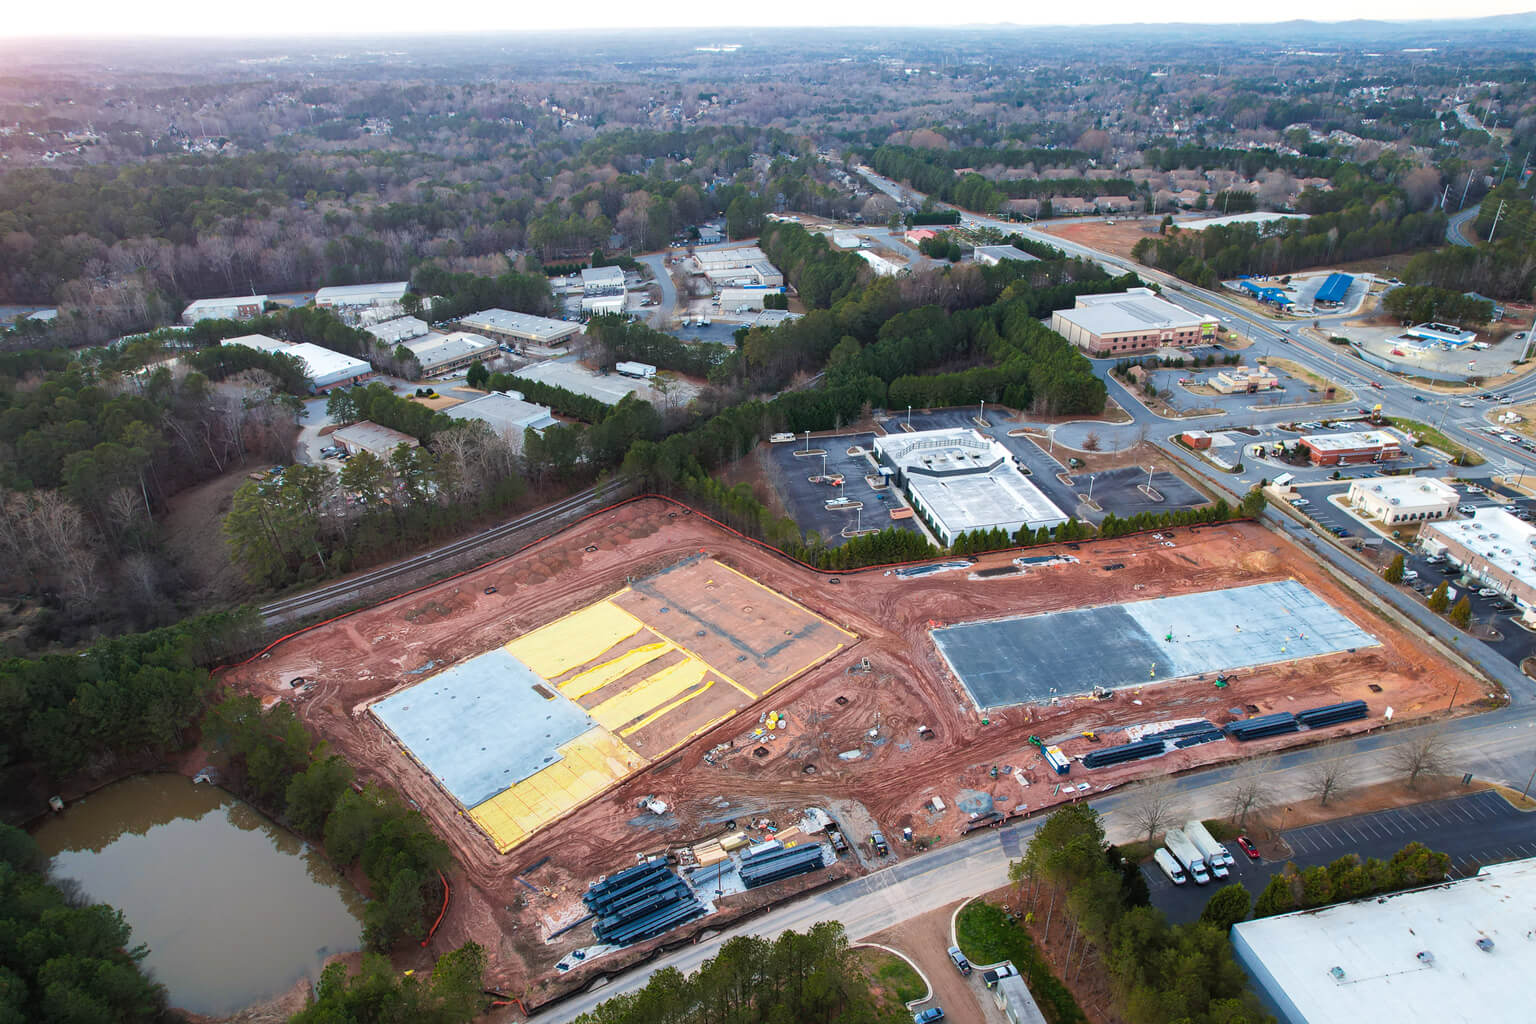 Kennesaw-75-Drone-Overview-12-22-21